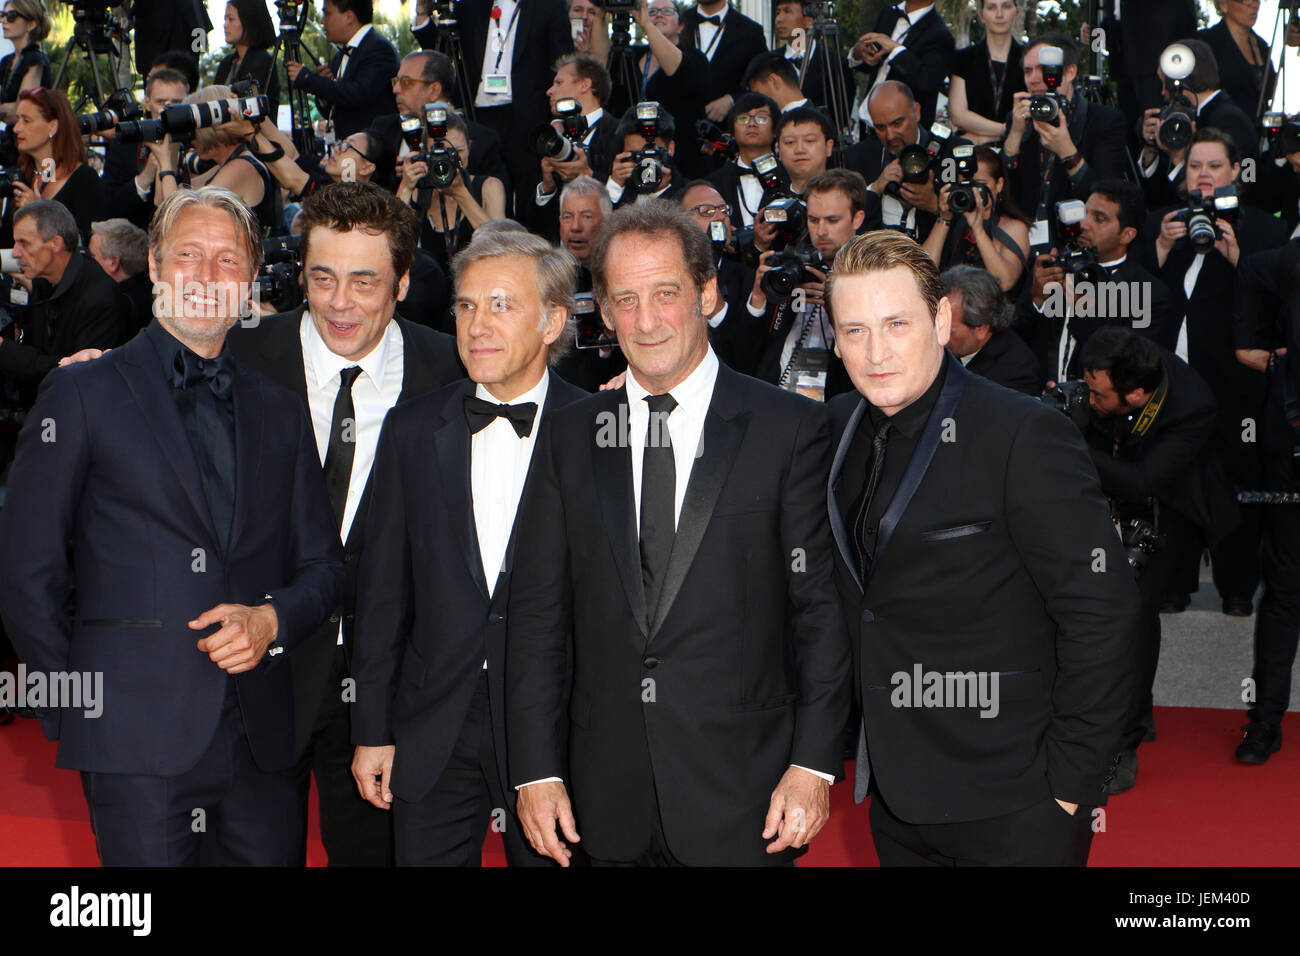 70th annual Cannes Film Festival - 'The Beguiled' - Premiere  Featuring: Christoph Waltz, Benicio del Toro, Vincent Lindon, Mads Mikkelsen, Benoit Magimel Where: CANNES, France When: 23 May 2017 Stock Photo